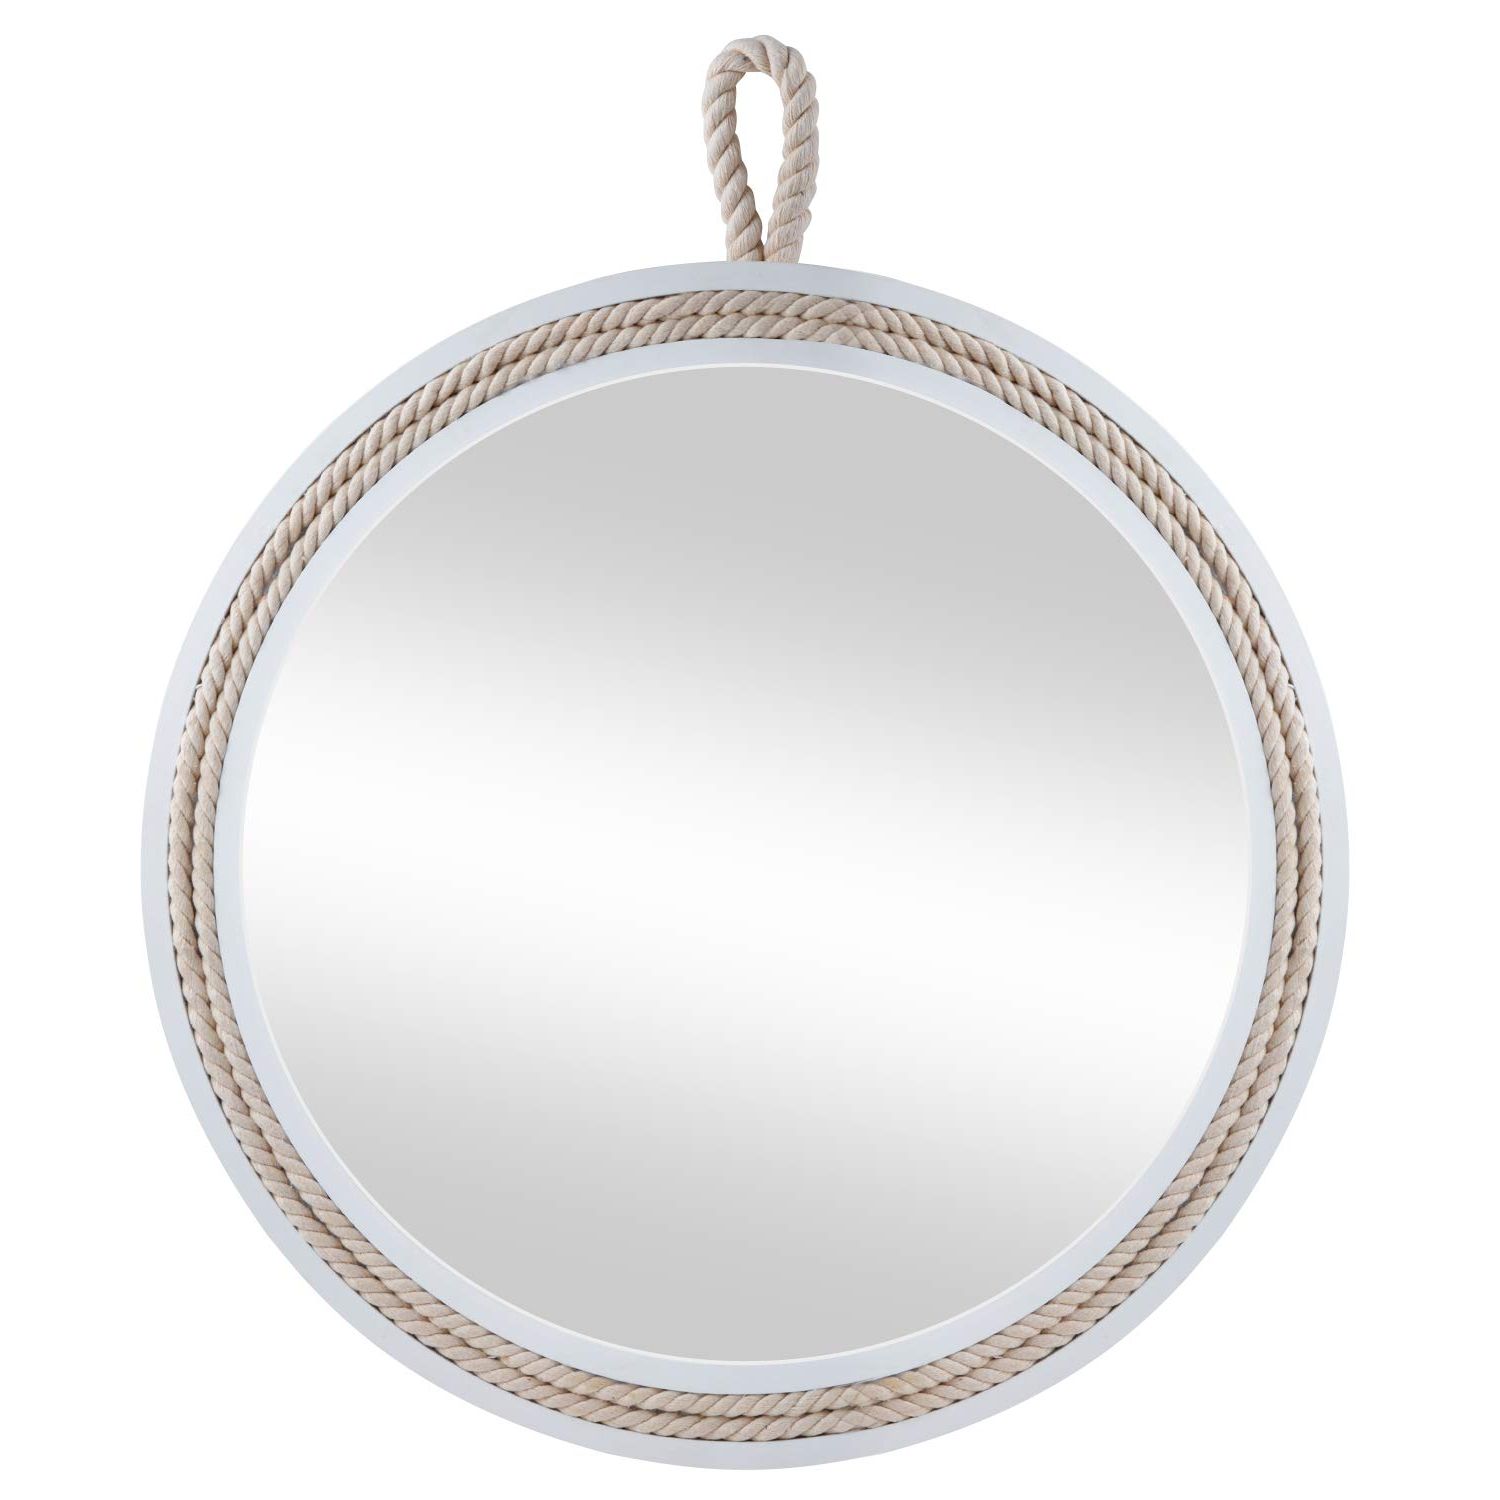 Small Round Decorative Wall Mirrors In Fashionable Decor Trends  (View 17 of 20)